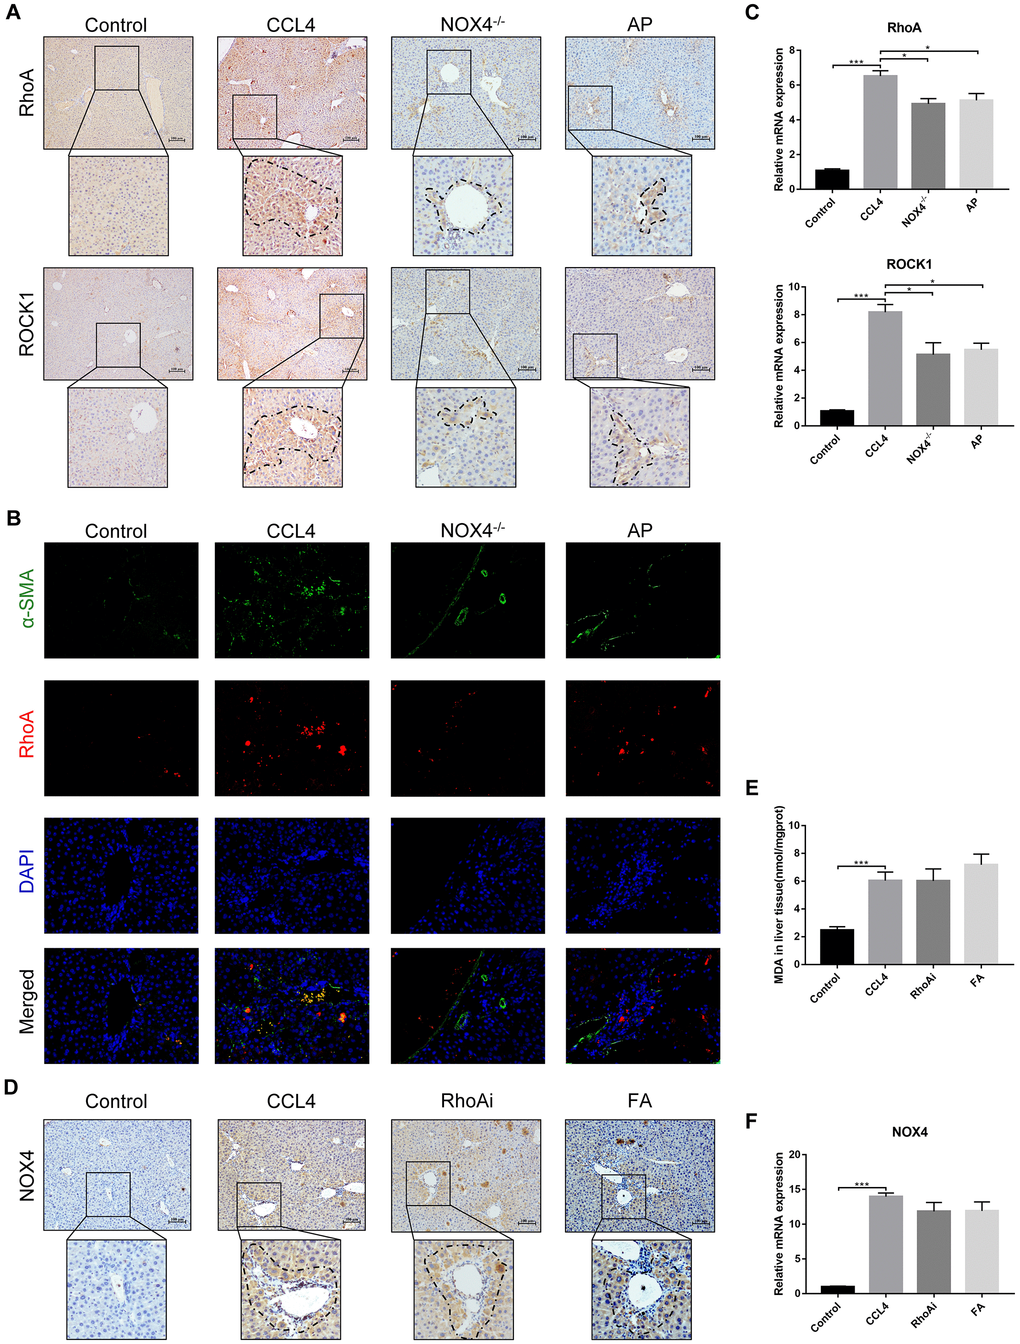 Interaction between NOX4/ROS and RhoA/ROCK1 in liver fibrotic mice. (A) In liver fibrotic mice in which NOX4 expression was inhibited, RhoA/ROCK1 expression was detected by IHC. (B) Dual immunofluorescence staining of liver sections from mice in the control, CCl4, NOX4-/- and AP groups stained for nuclei (DAPI, blue), aHSCs (α-SMA, green), and RhoA (red), and the merged images are shown. (C) Hepatic mRNA levels of RhoA/ROCK1 were measured by qRT-PCR. (D) In liver fibrotic mice in which RhoA expression was inhibited, NOX4 expression was detected by IHC. (E) Detection of the MDA content in the liver by a commercial kit. (F) Hepatic mRNA levels of NOX4 were measured by qRT-PCR. Data represent the mean ± SD of each group. *P 